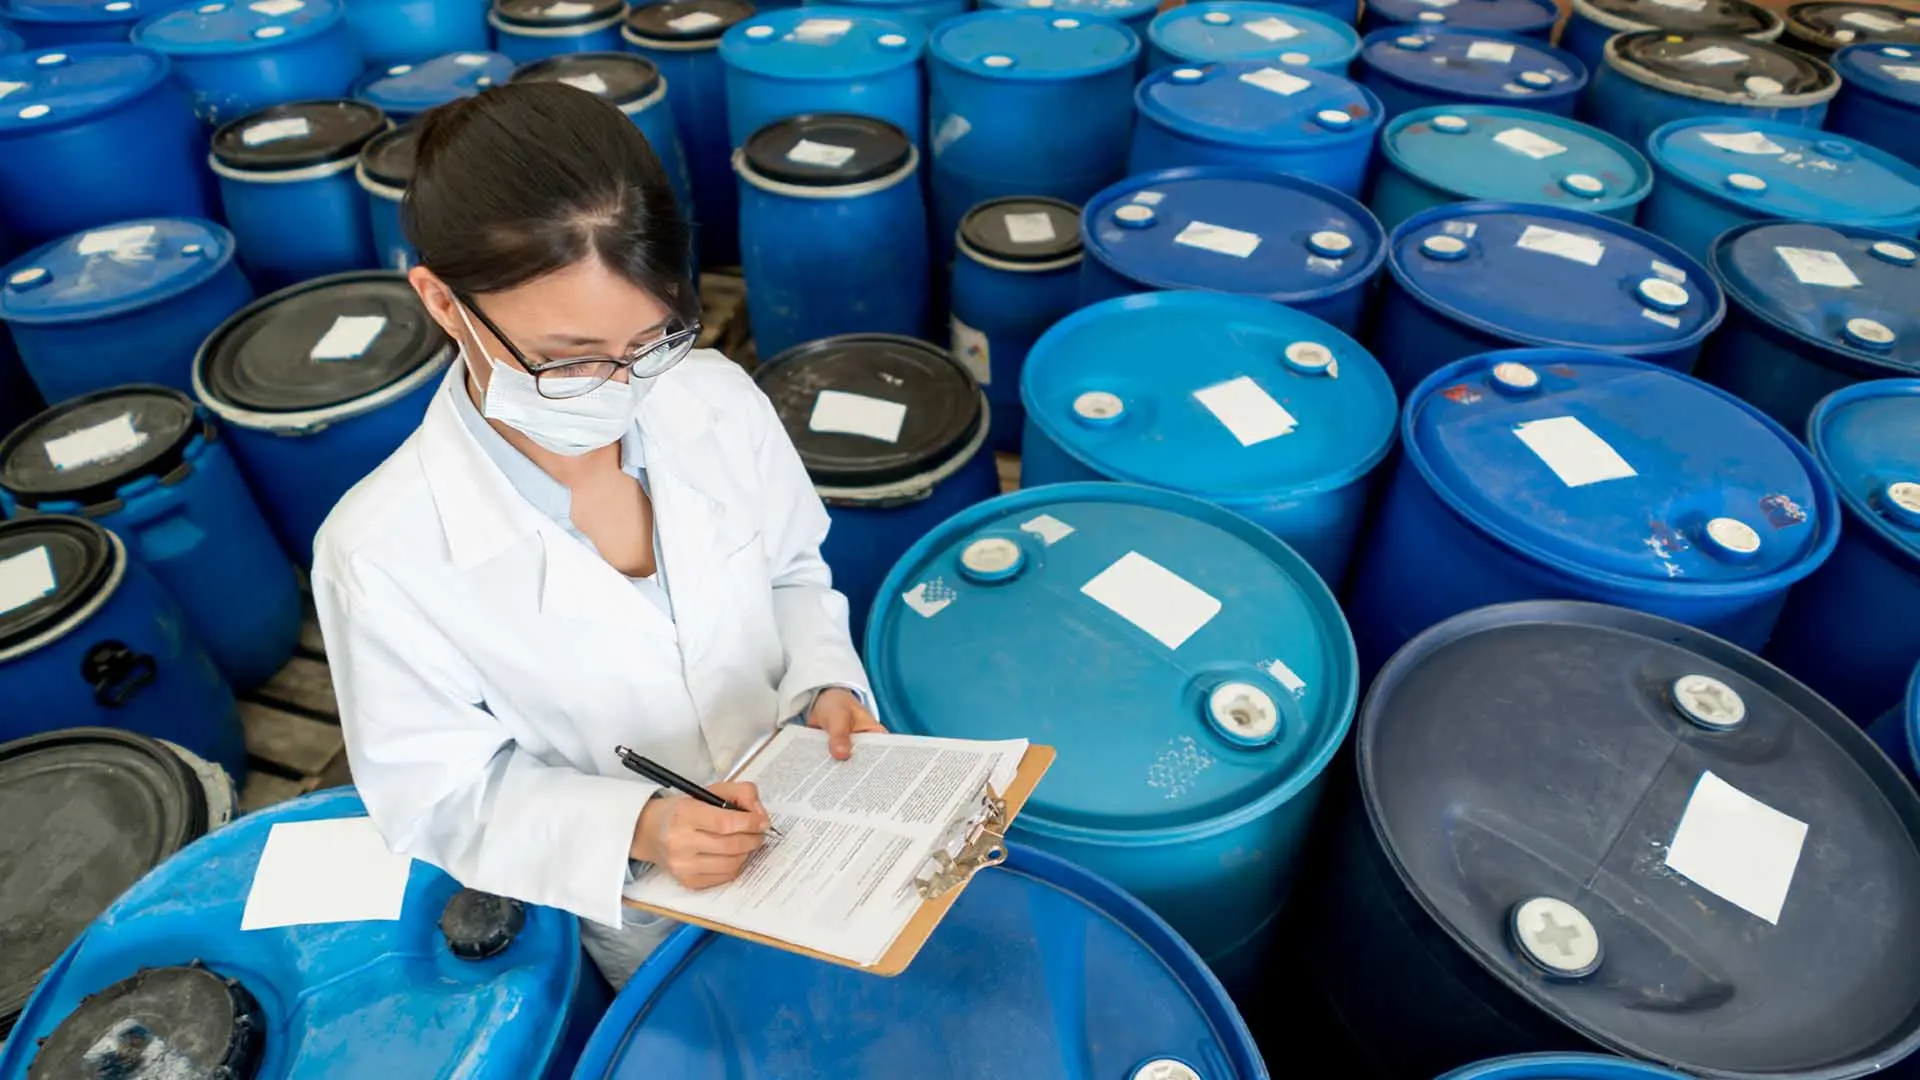 Woman with lab coat on chemical floor taking inventory.